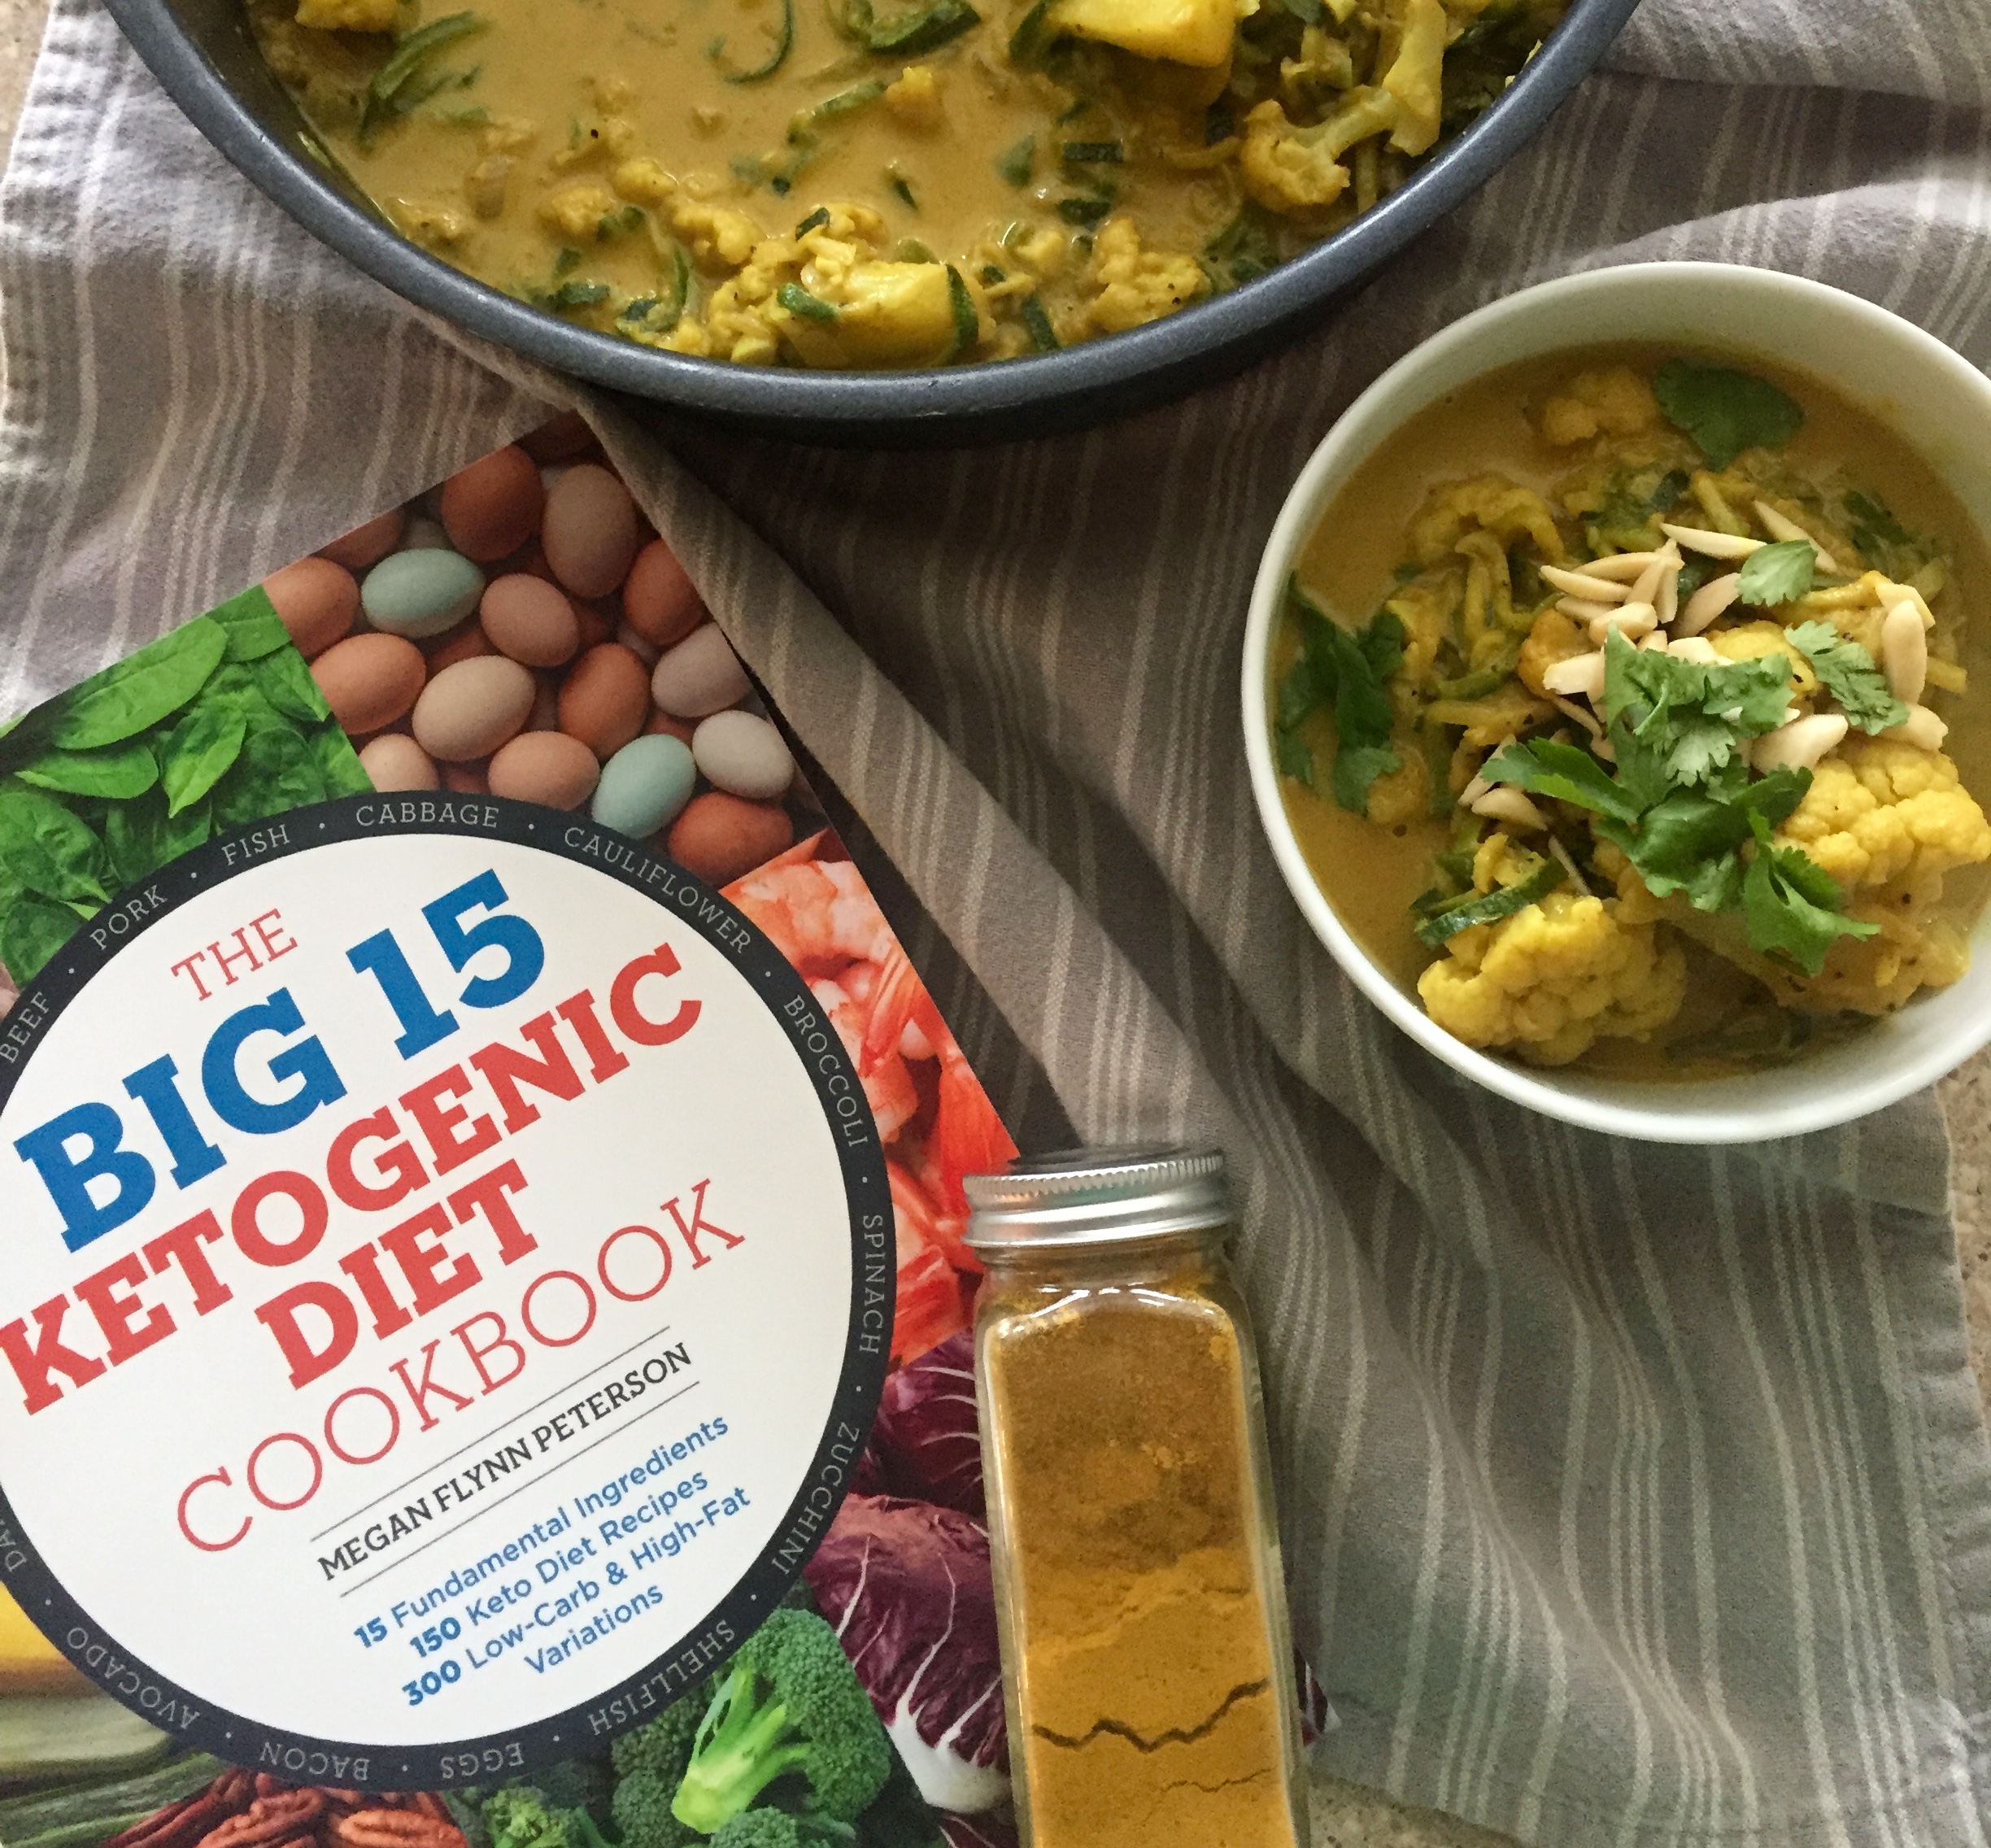 Curried Coconut Cauliflower and Big 15 Ketogenic Diet Cookbook